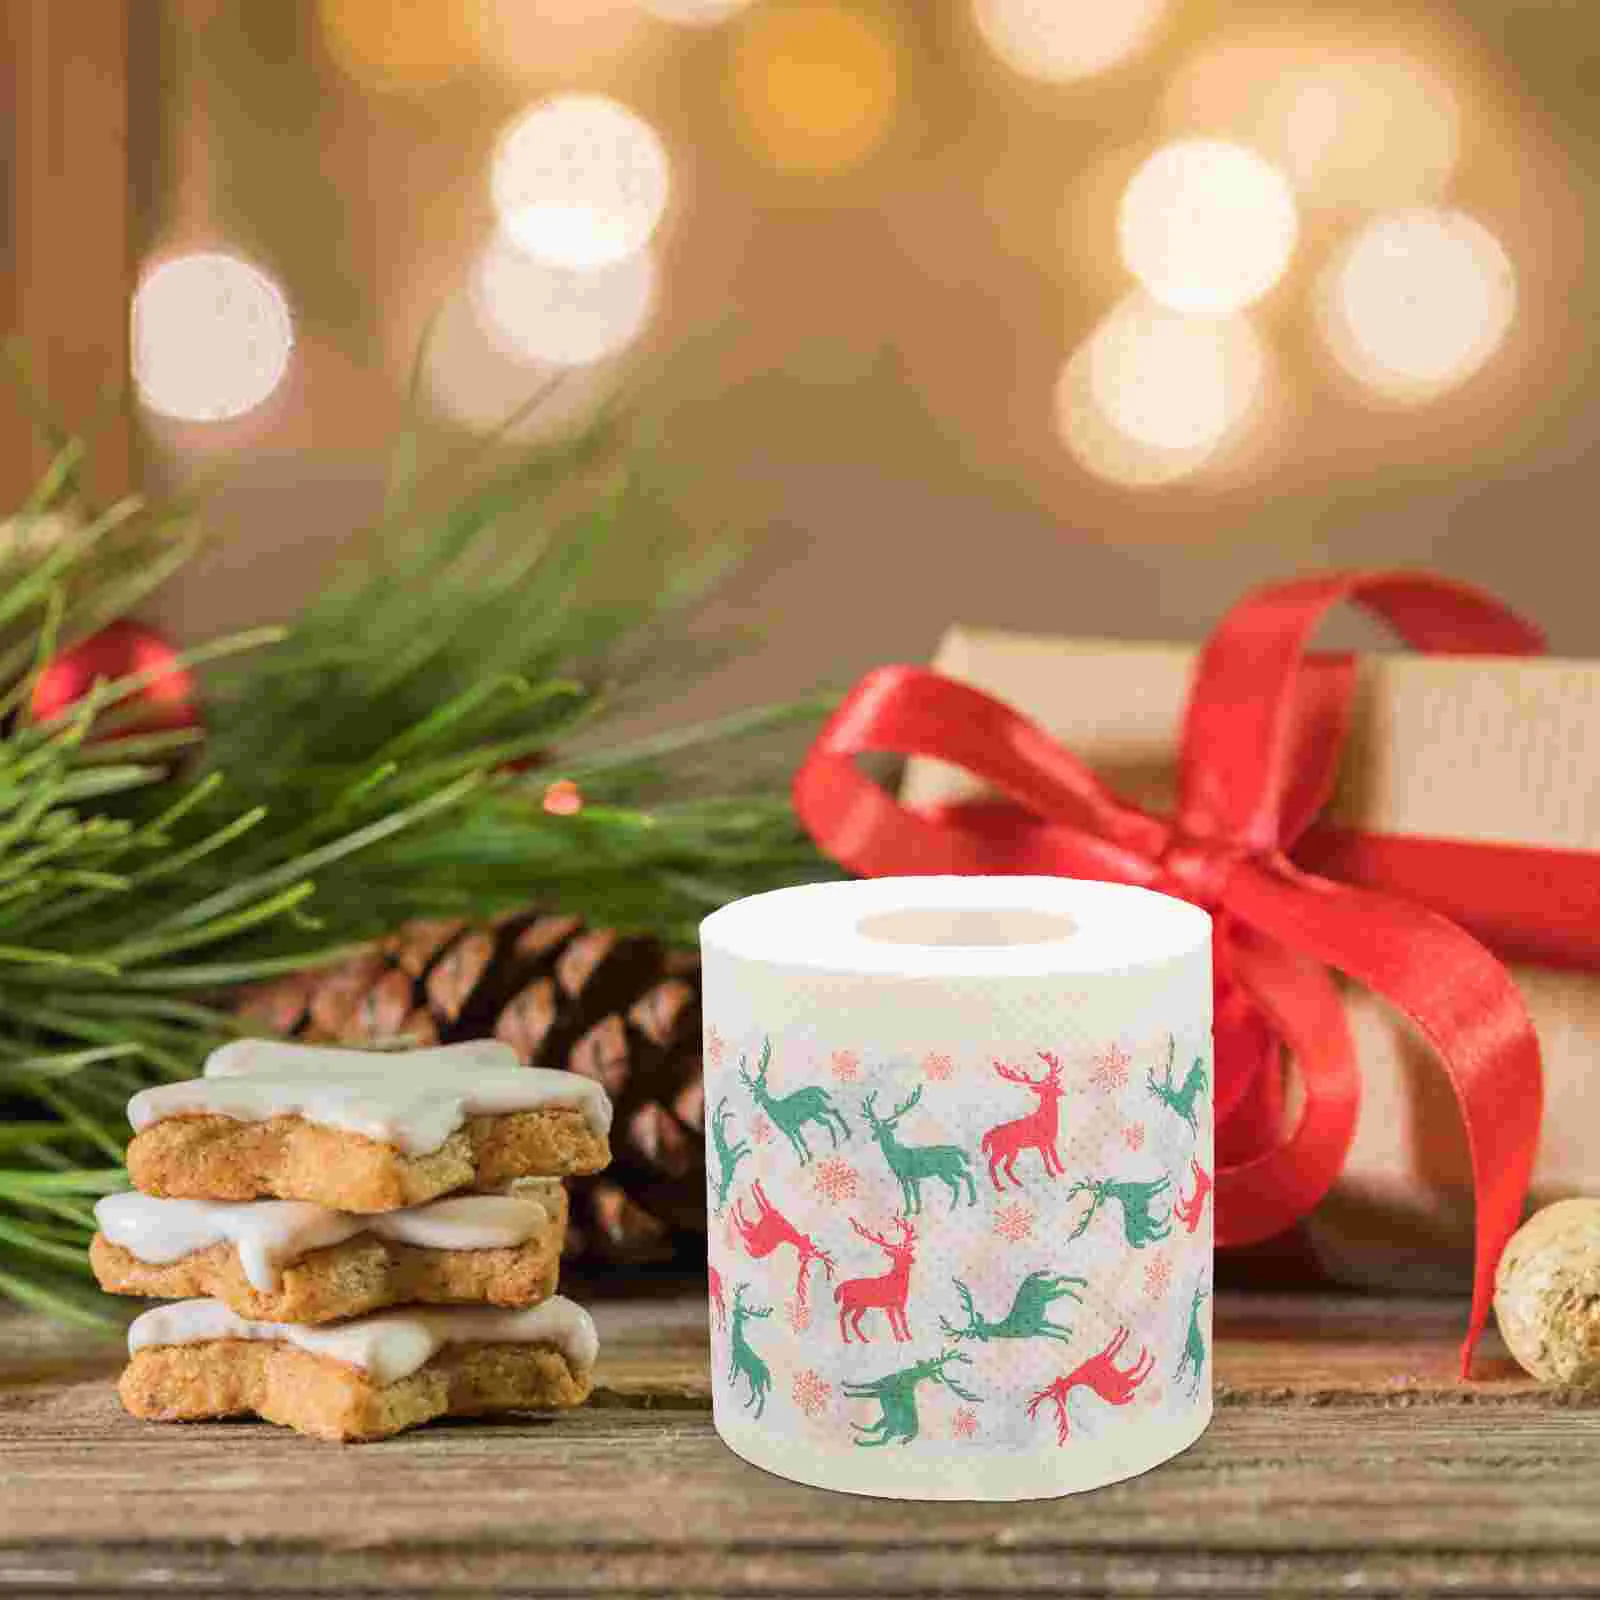 

Christmas Deer Tissue Paper Hand Towels Printed Supply Lovely Skin Friendly Decor Wood Pulp Toilet Roll